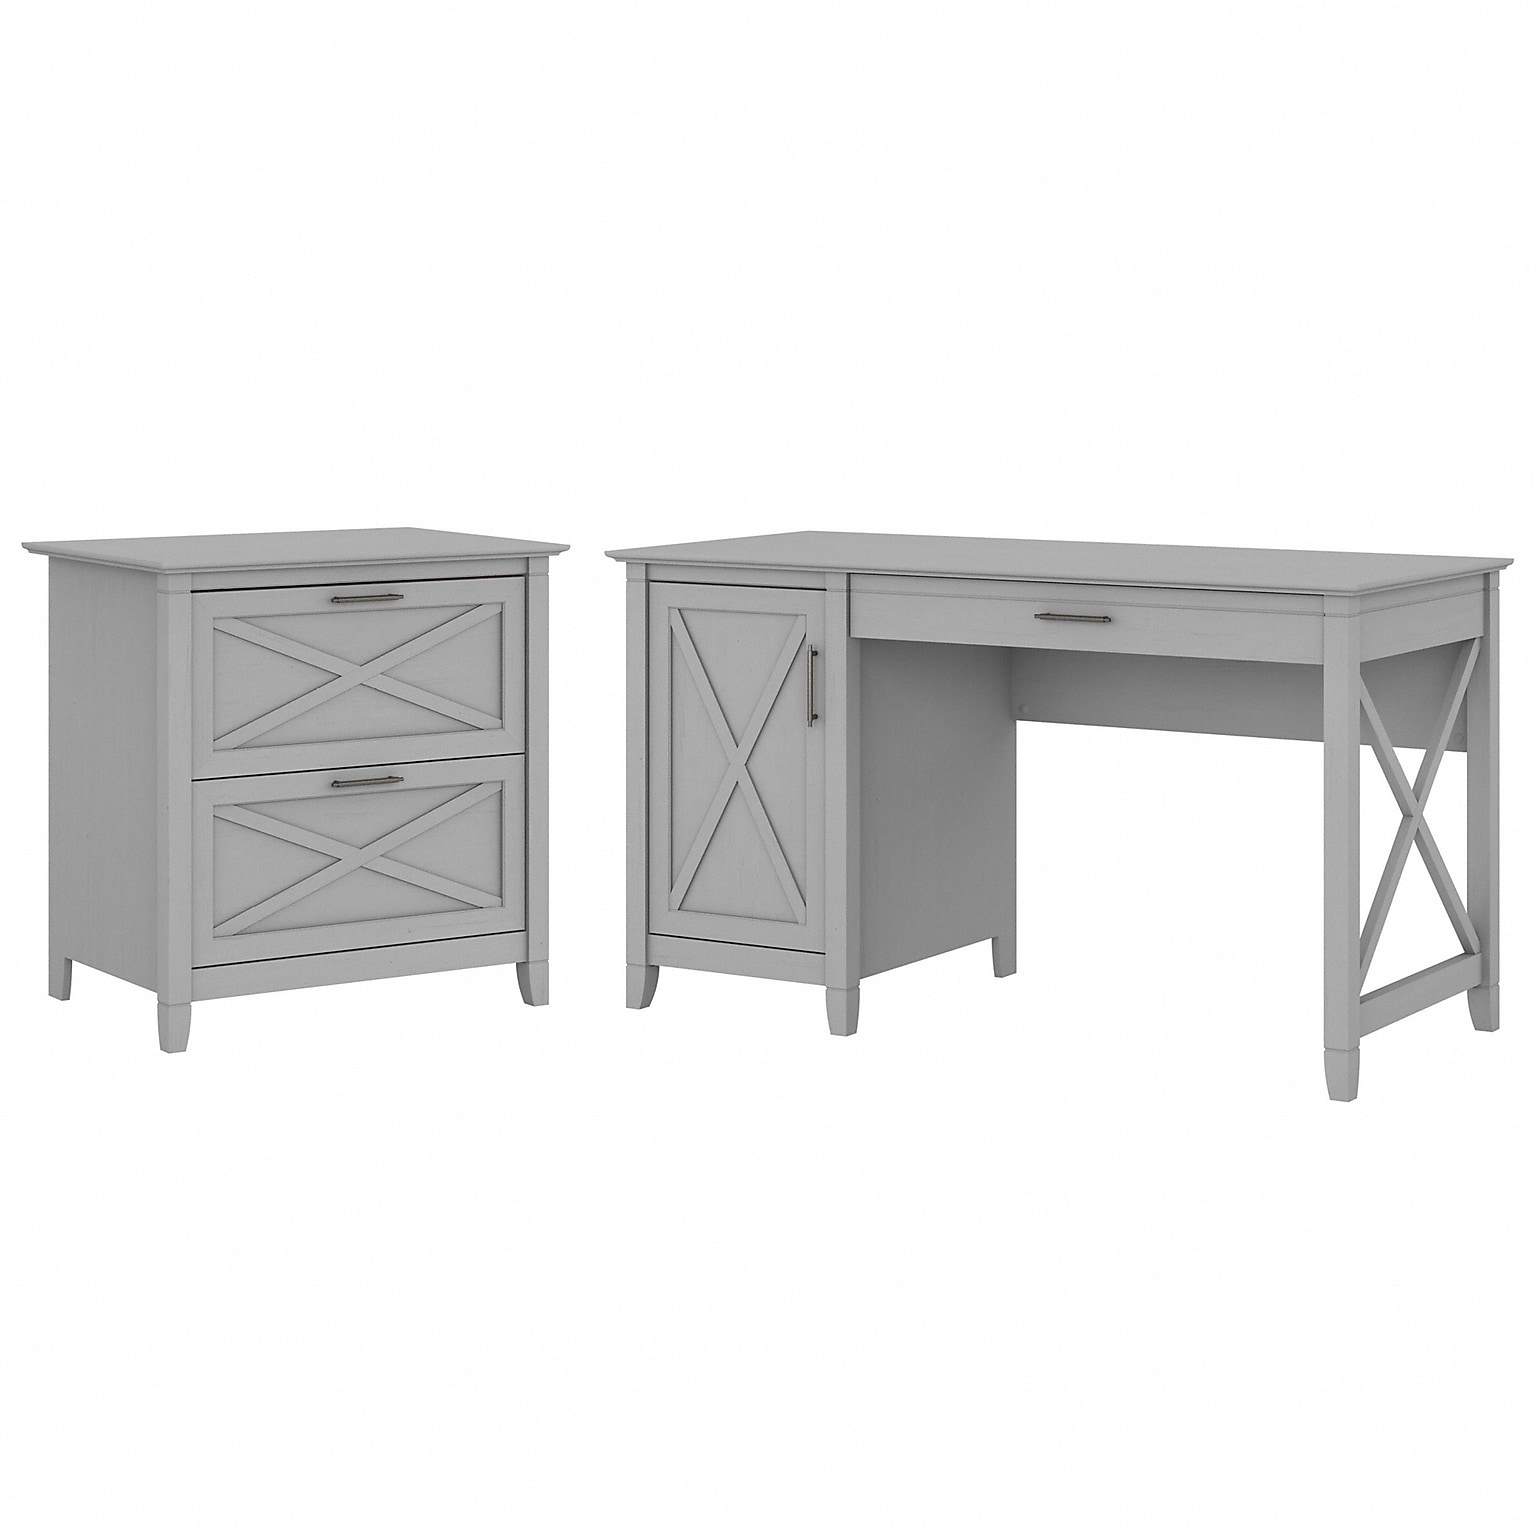 Bush Furniture Key West 54W Computer Desk with Storage and 2-Drawer Lateral File Cabinet, Cape Cod Gray (KWS008CG)